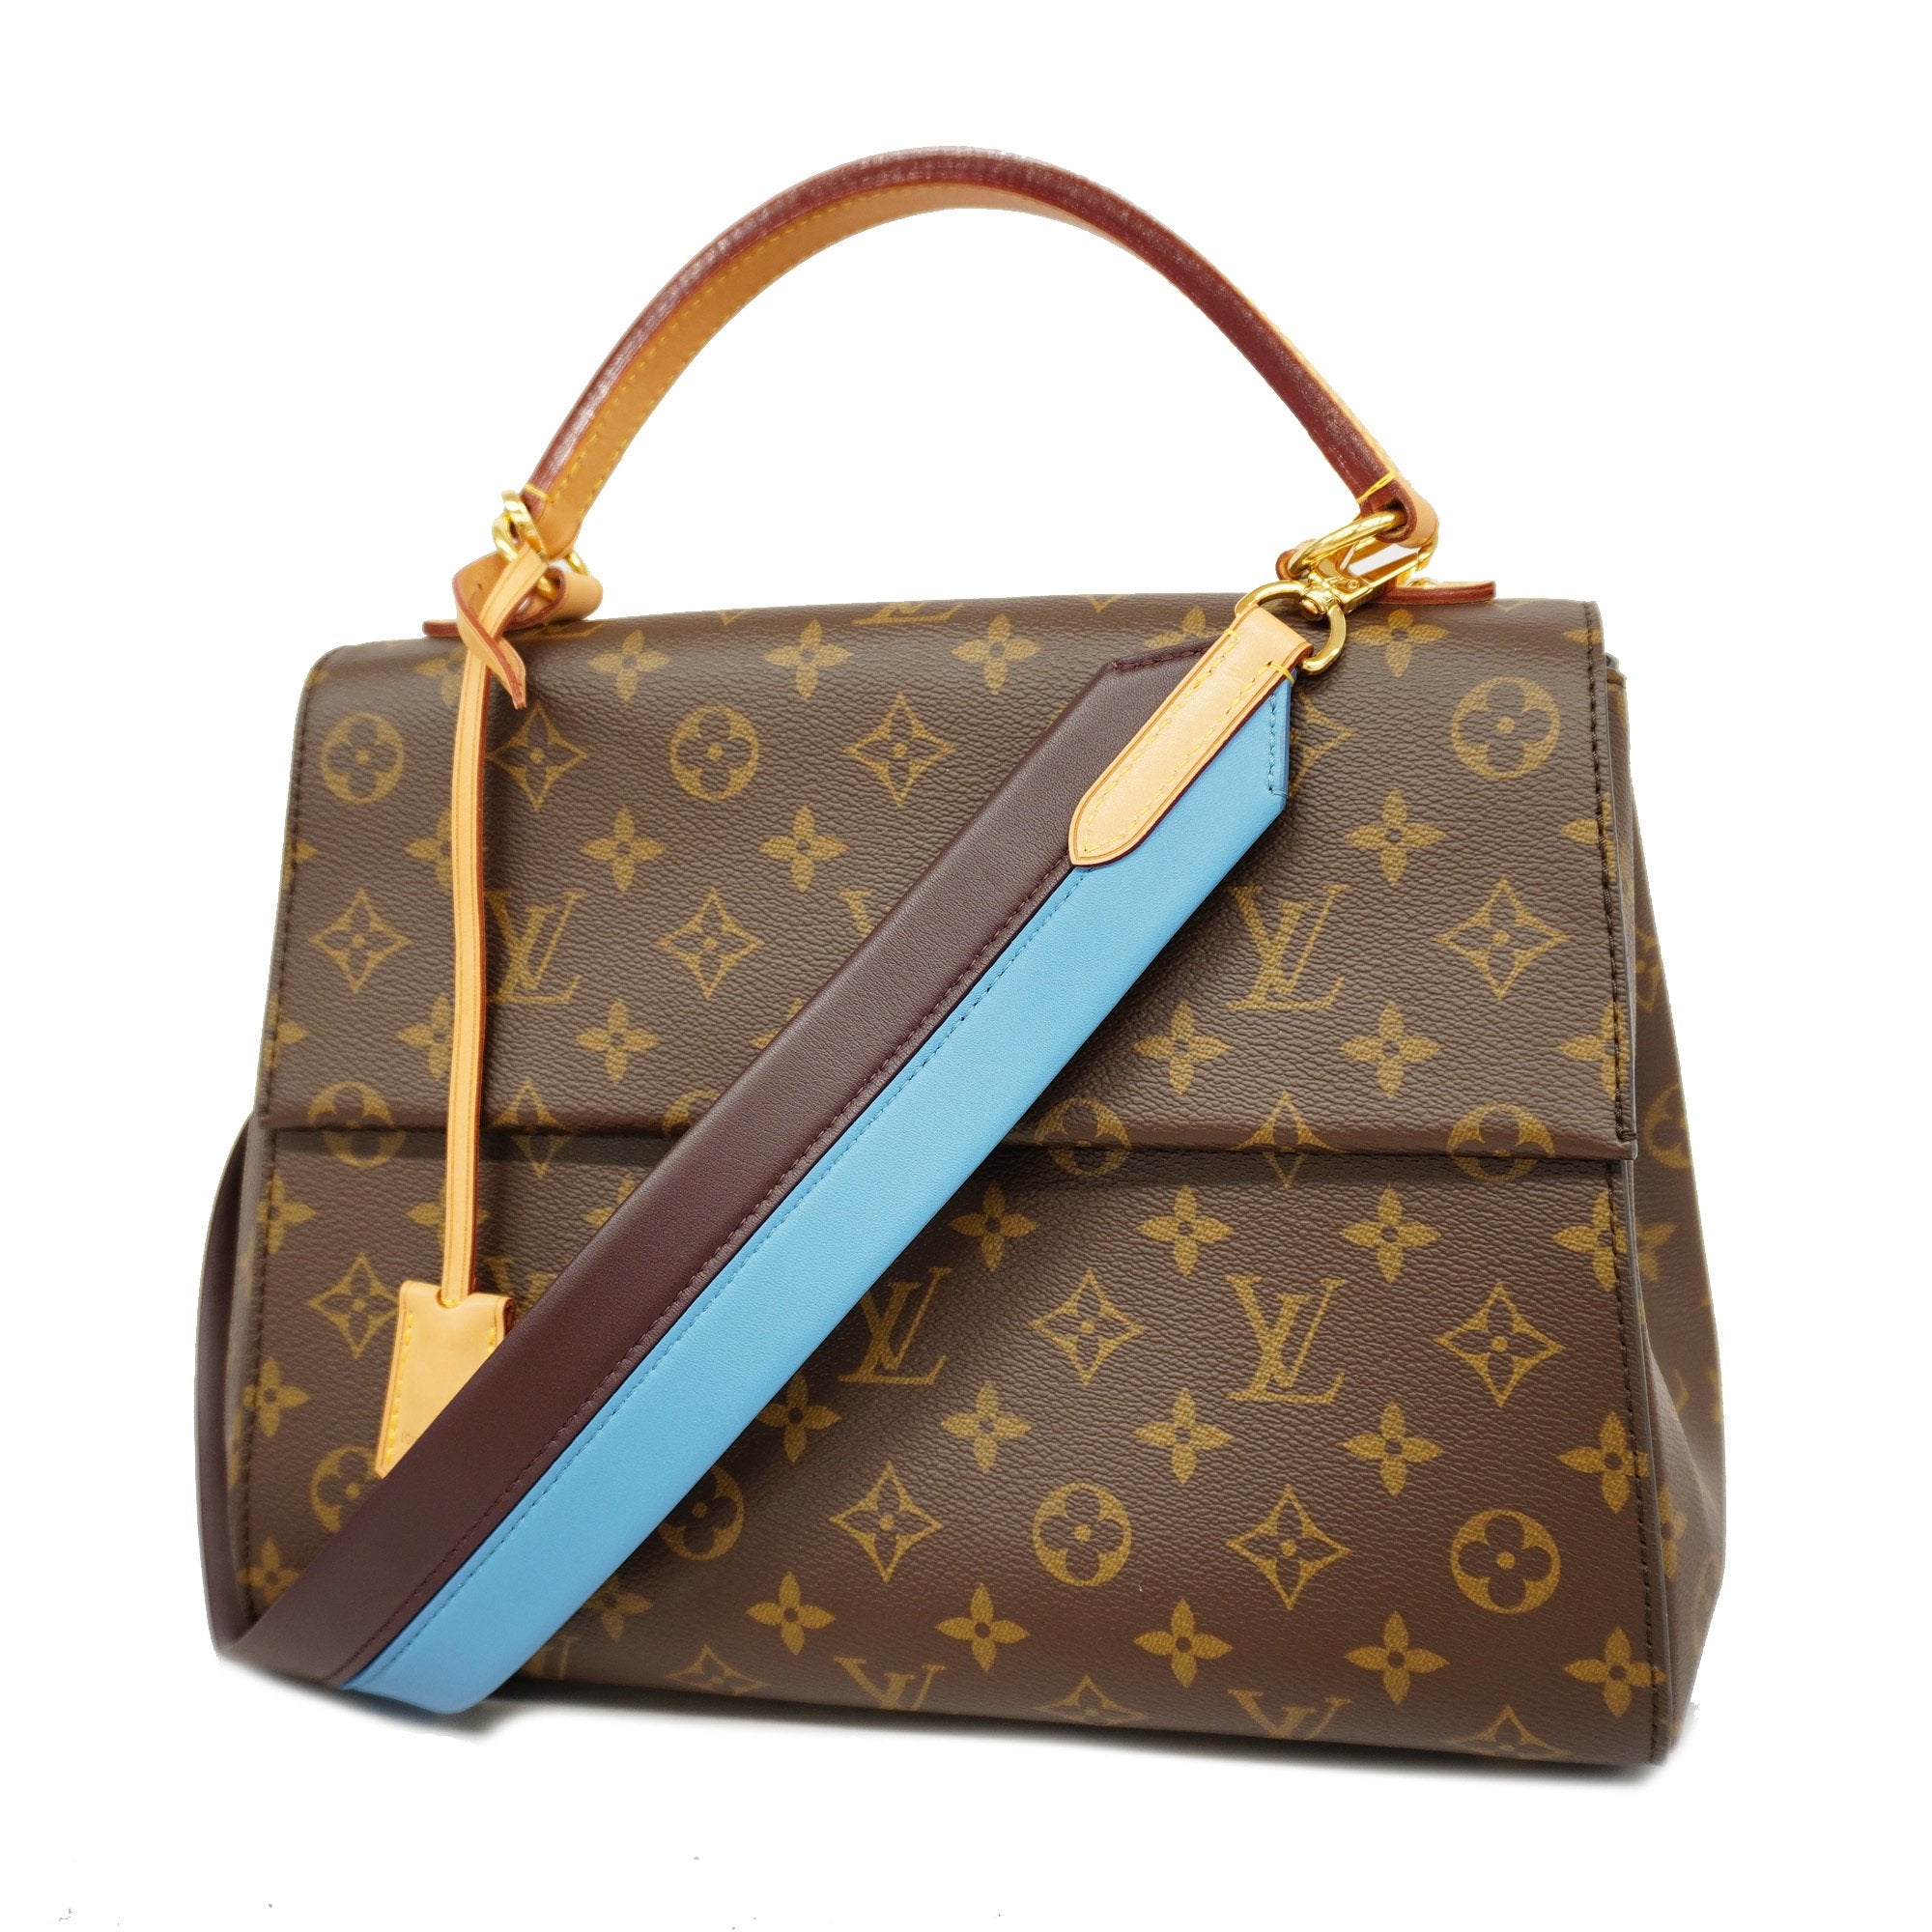 Louis Vuitton Monogram Canvas Blue Glacial Cluny mm - Handbag | Pre-owned & Certified | used Second Hand | Unisex